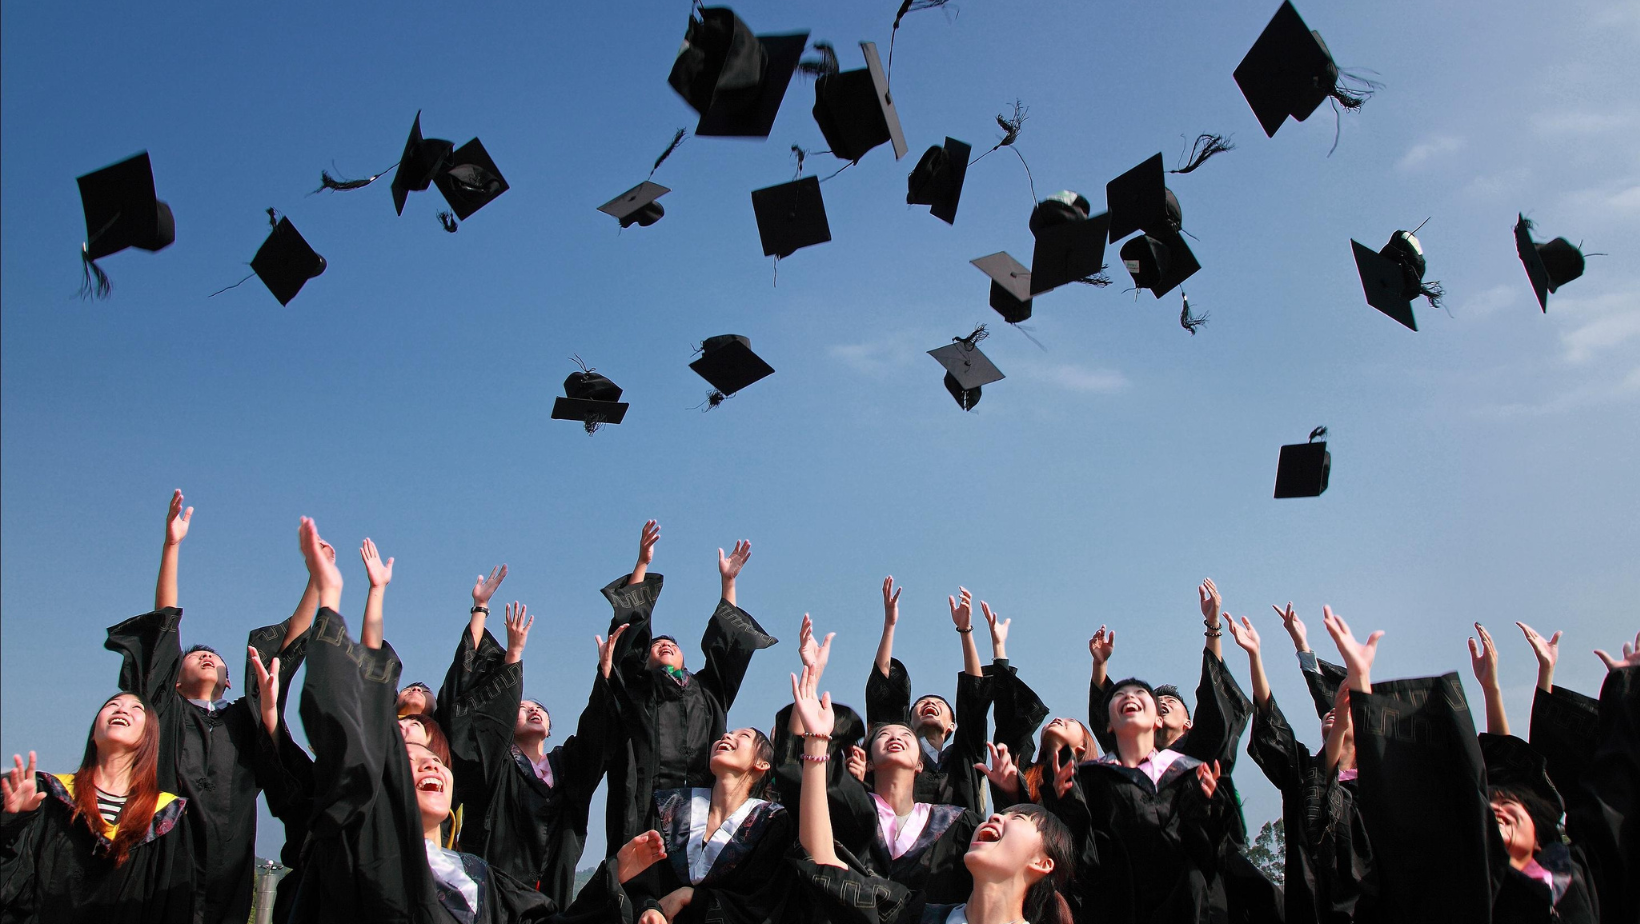 67,685 Child Graduates Royalty-Free Photos and Stock Images | Shutterstock